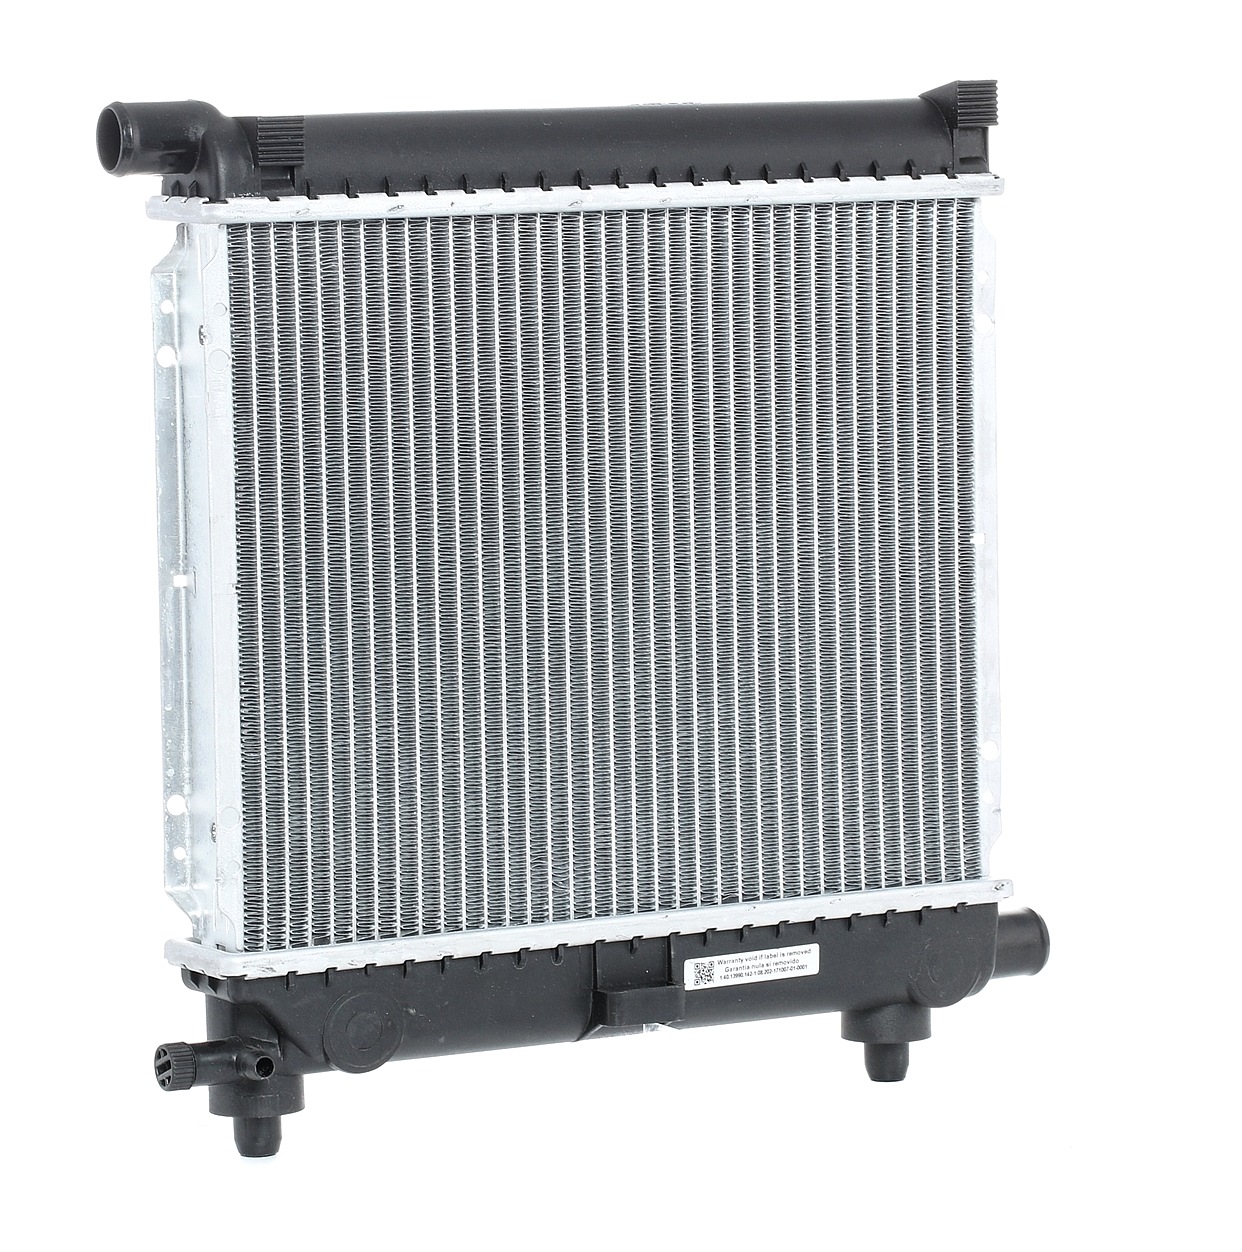 RIDEX 470R0249 Engine radiator for vehicles without air conditioning, Manual Transmission